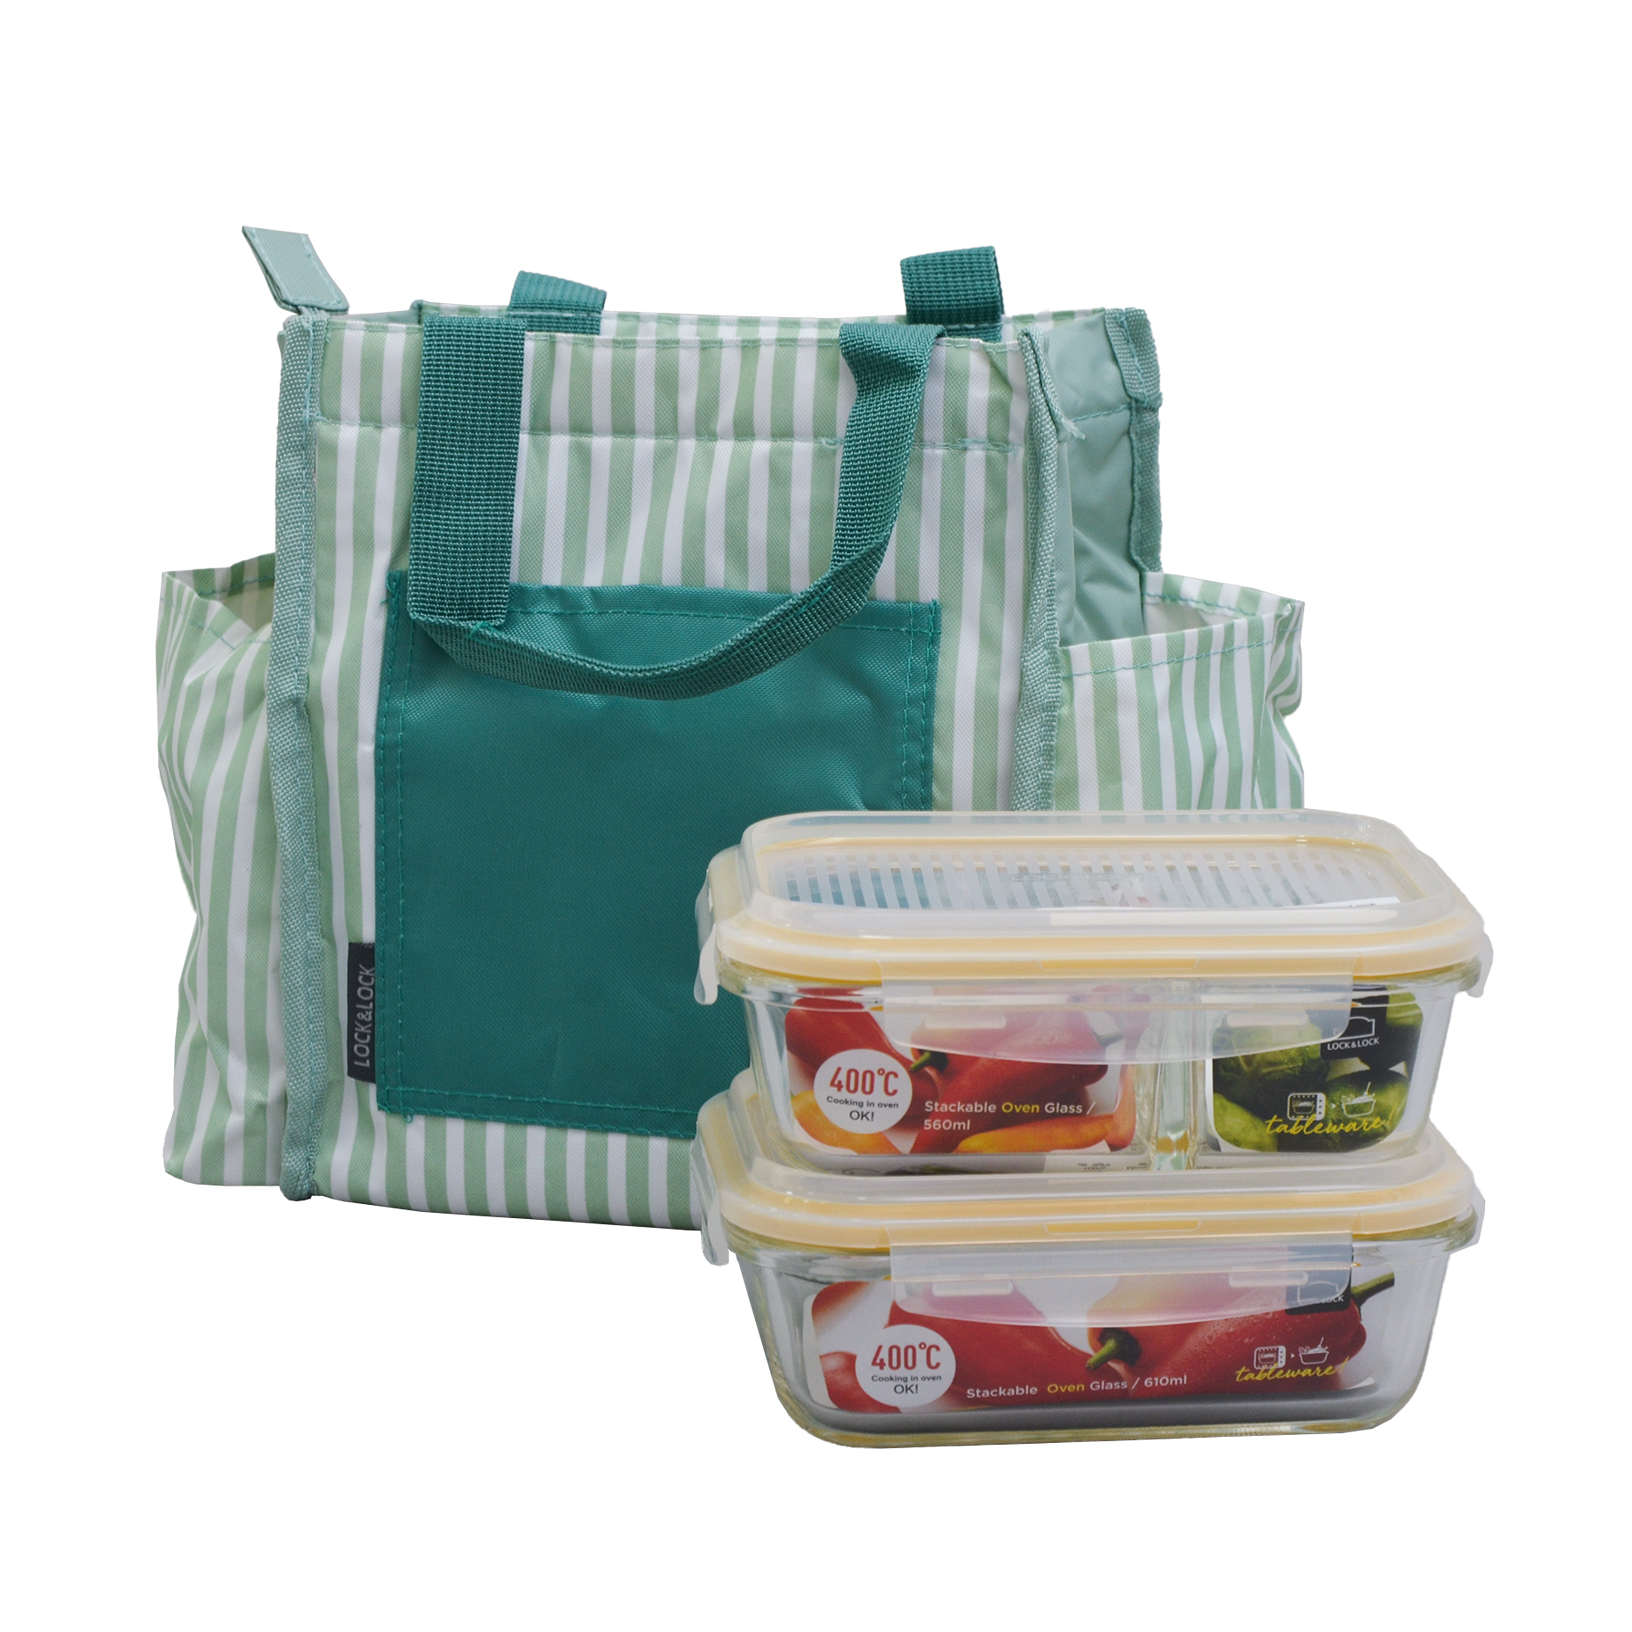 LLG990 + LLG990CSTACKABLE GLASS CONTAINER + LUNCH BAG(W/2-SIDED POCKET) + HANG TAG